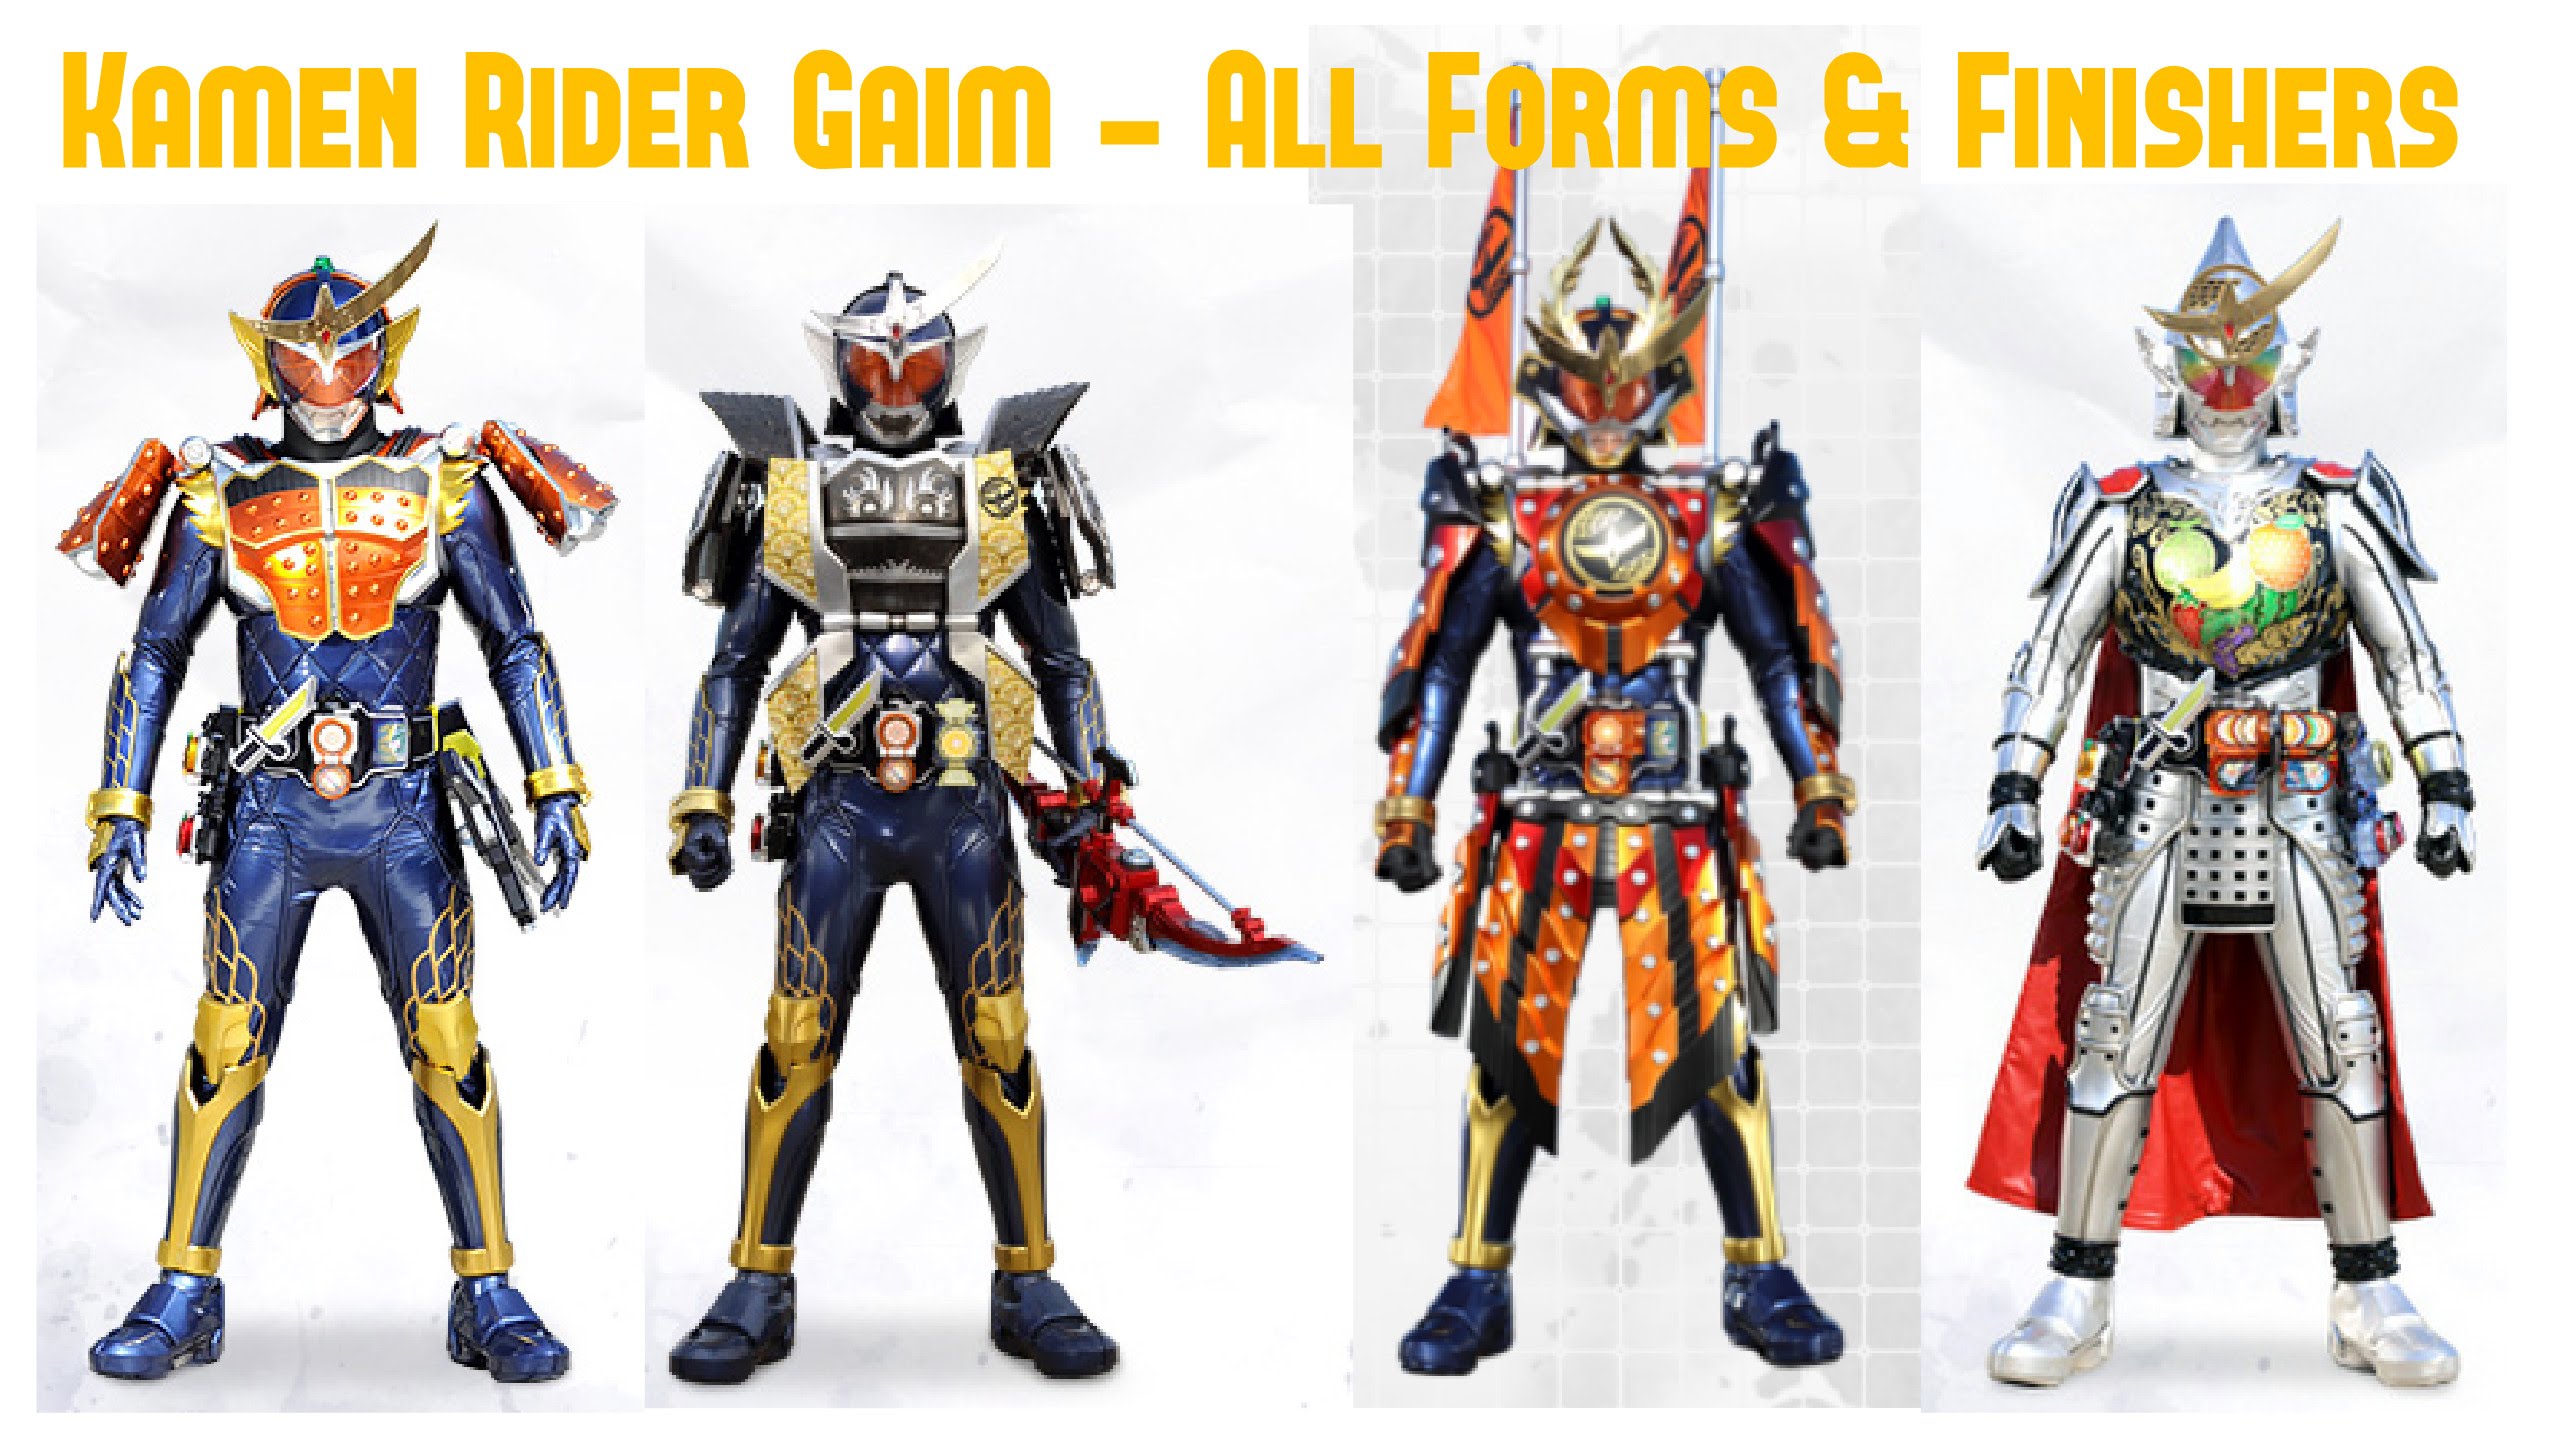 Kamen Rider Gaim - All Forms and Finishers - YouTube